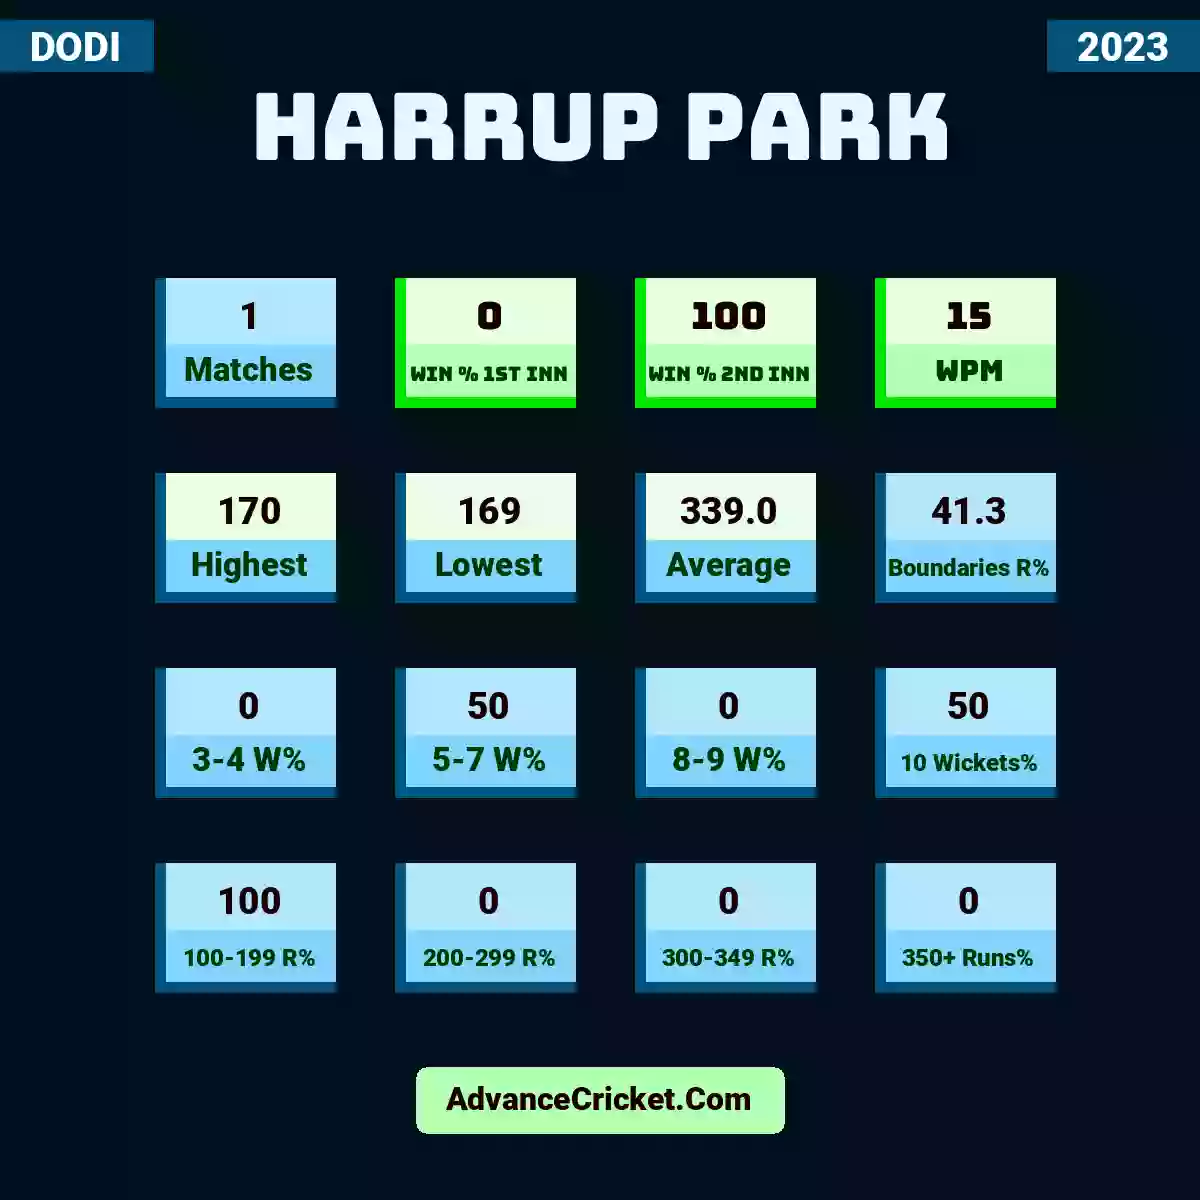 Image showing Harrup Park with Matches: 1, Win % 1st Inn: 0, Win % 2nd Inn: 100, WPM: 15, Highest: 170, Lowest: 169, Average: 339.0, Boundaries R%: 41.3, 3-4 W%: 0, 5-7 W%: 50, 8-9 W%: 0, 10 Wickets%: 50, 100-199 R%: 100, 200-299 R%: 0, 300-349 R%: 0, 350+ Runs%: 0.